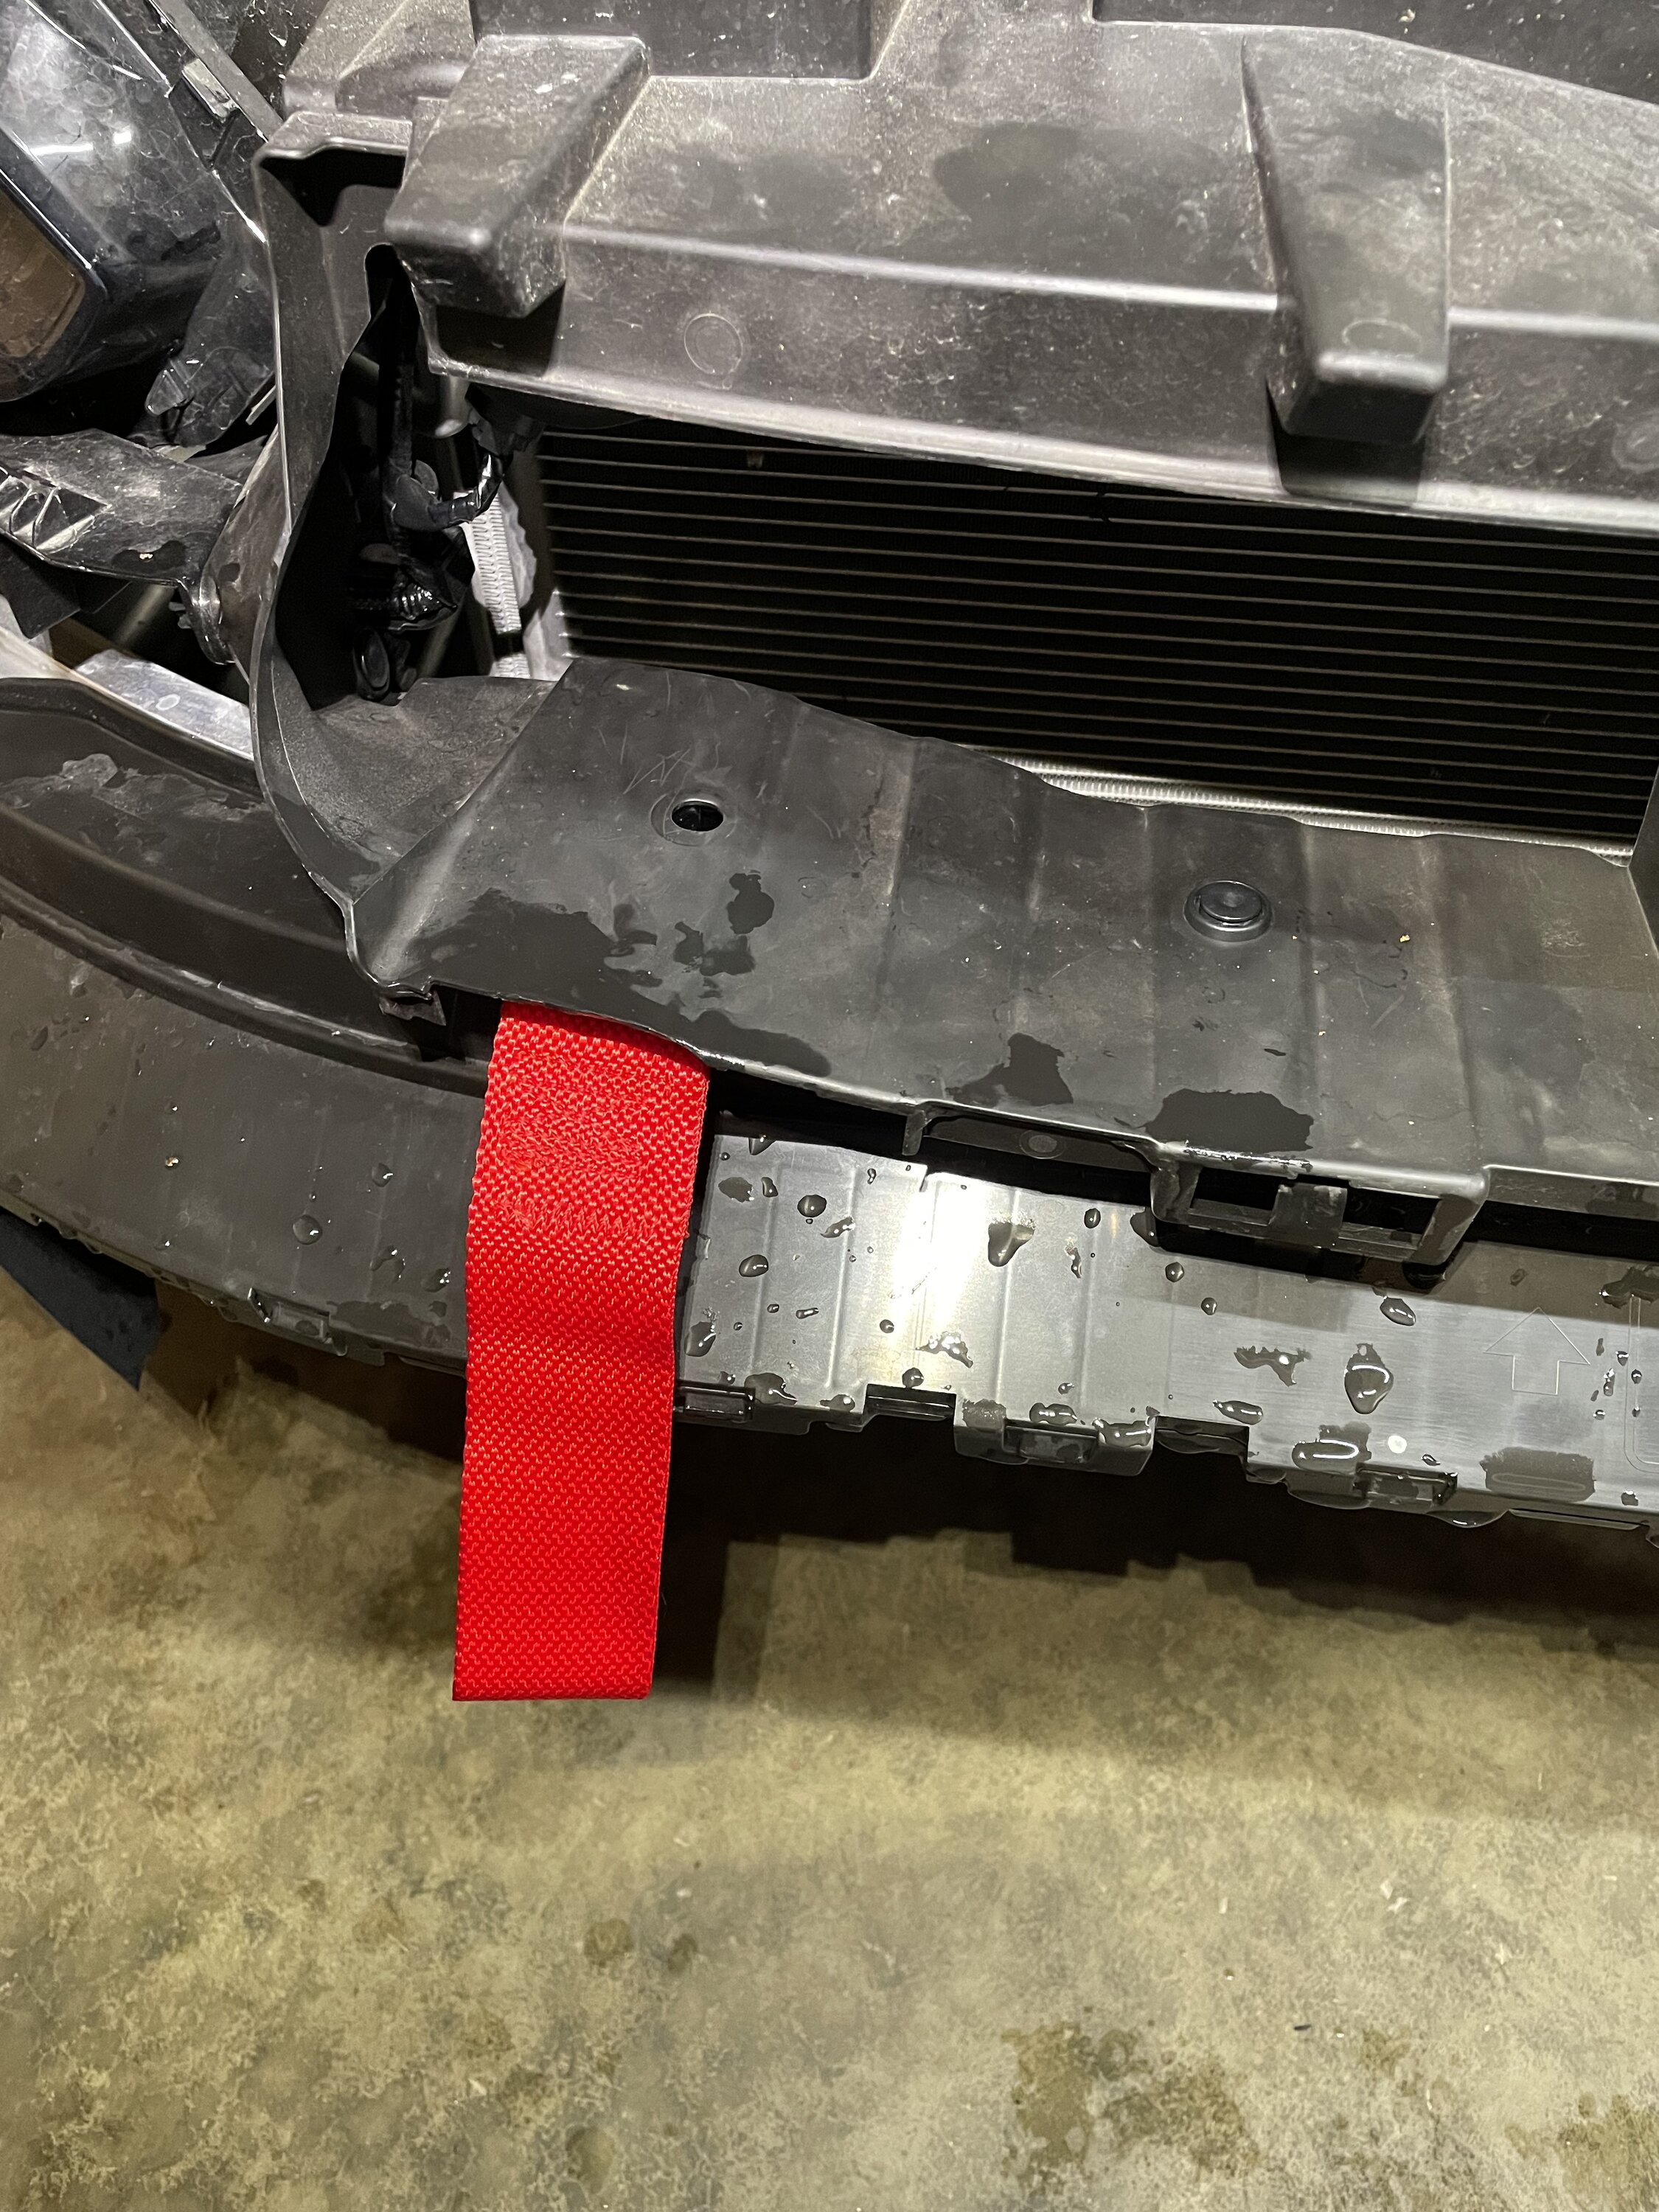 11th Gen Honda Civic Tow Strap Setup for the Track IMG_1784